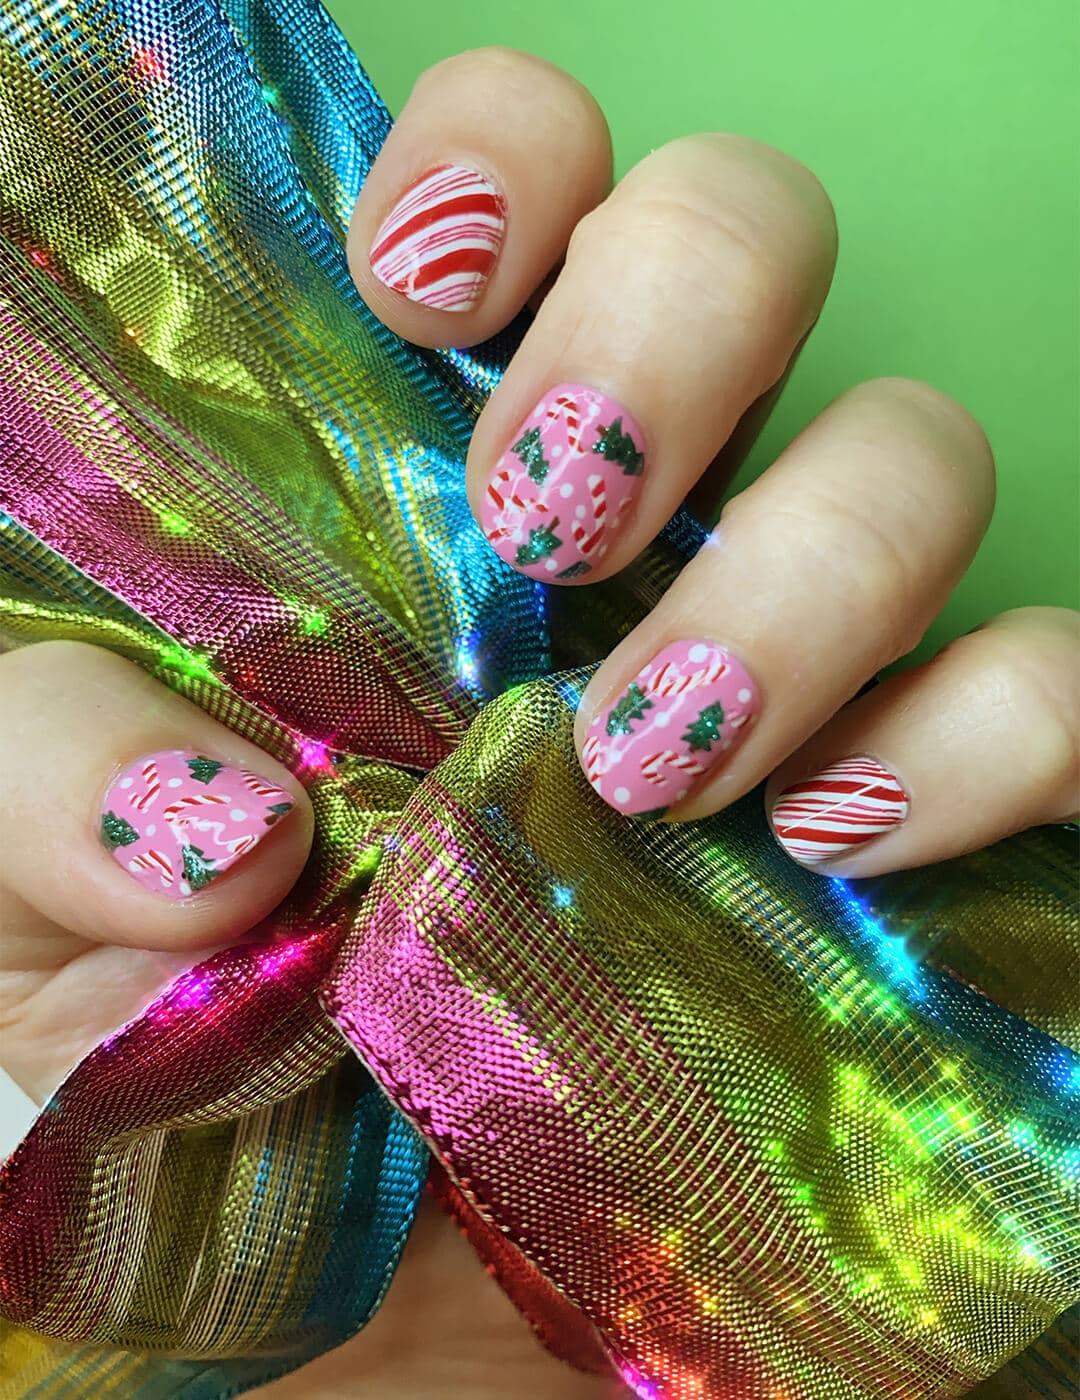 Close-up image of a model's hand with a peppermint, candy cane, and Christmas tree themed nail art mani holding a shiny rainbow colored ribbon